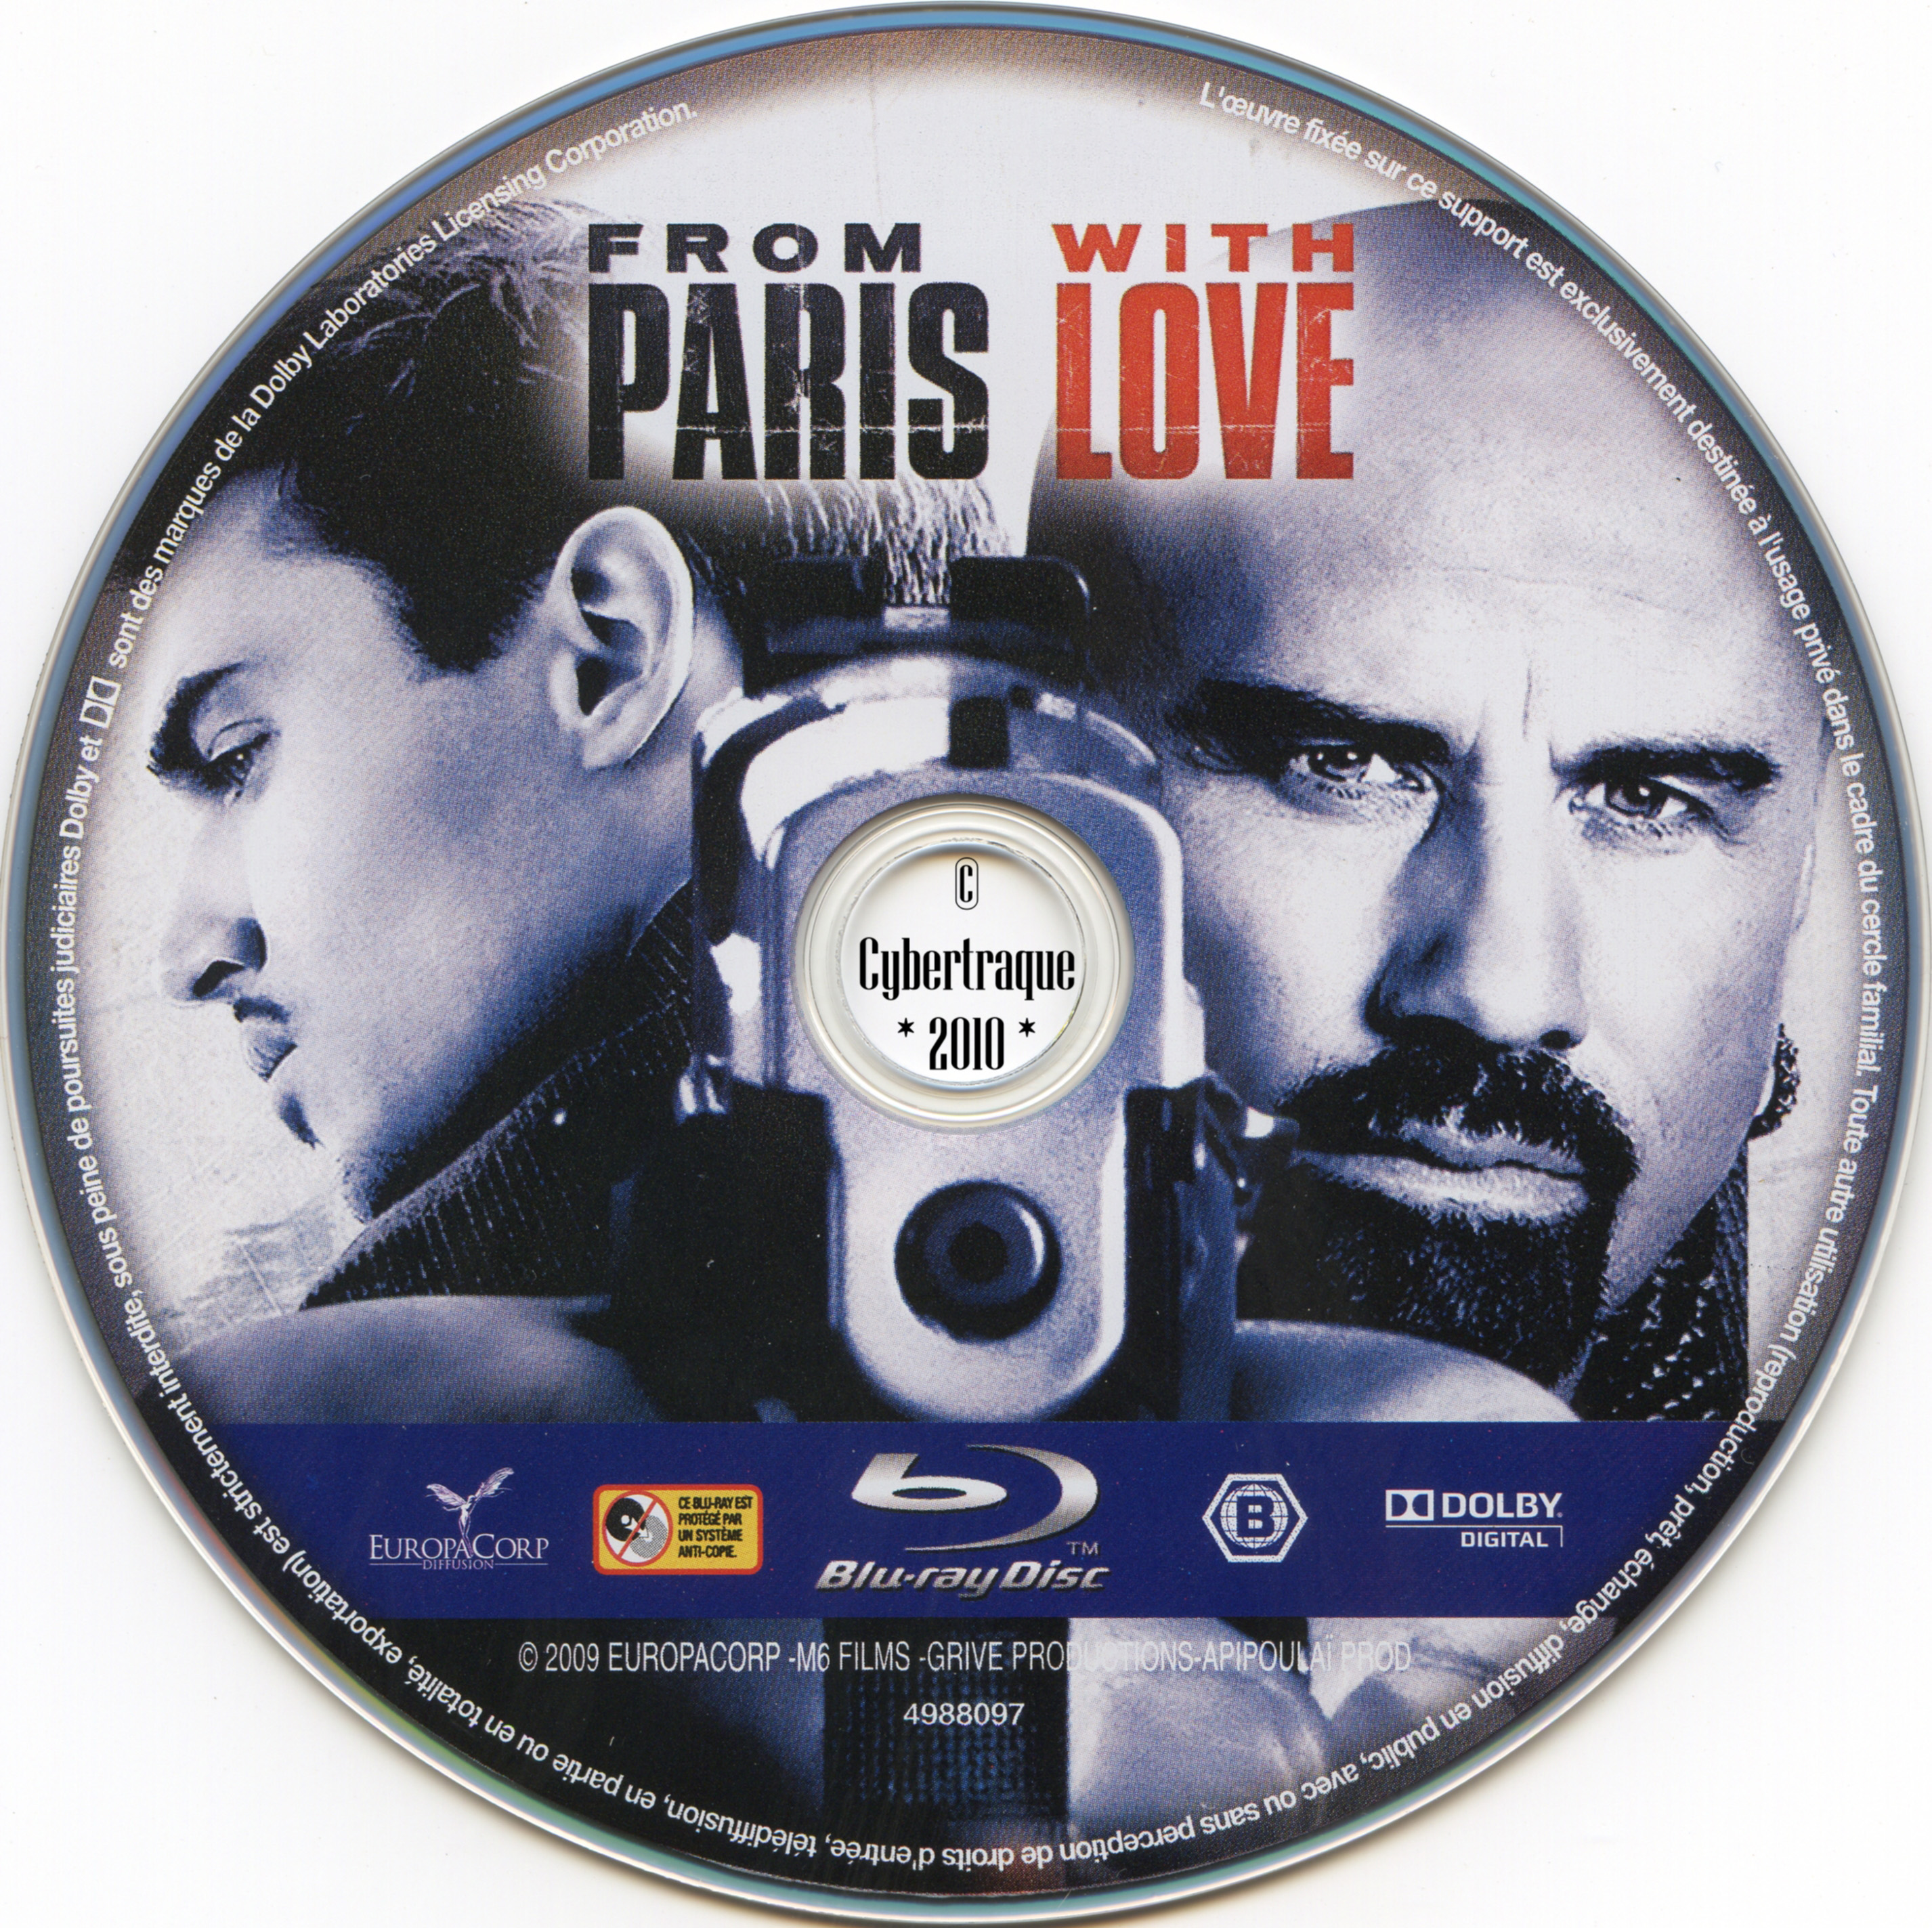 From Paris with love (BLU-RAY)